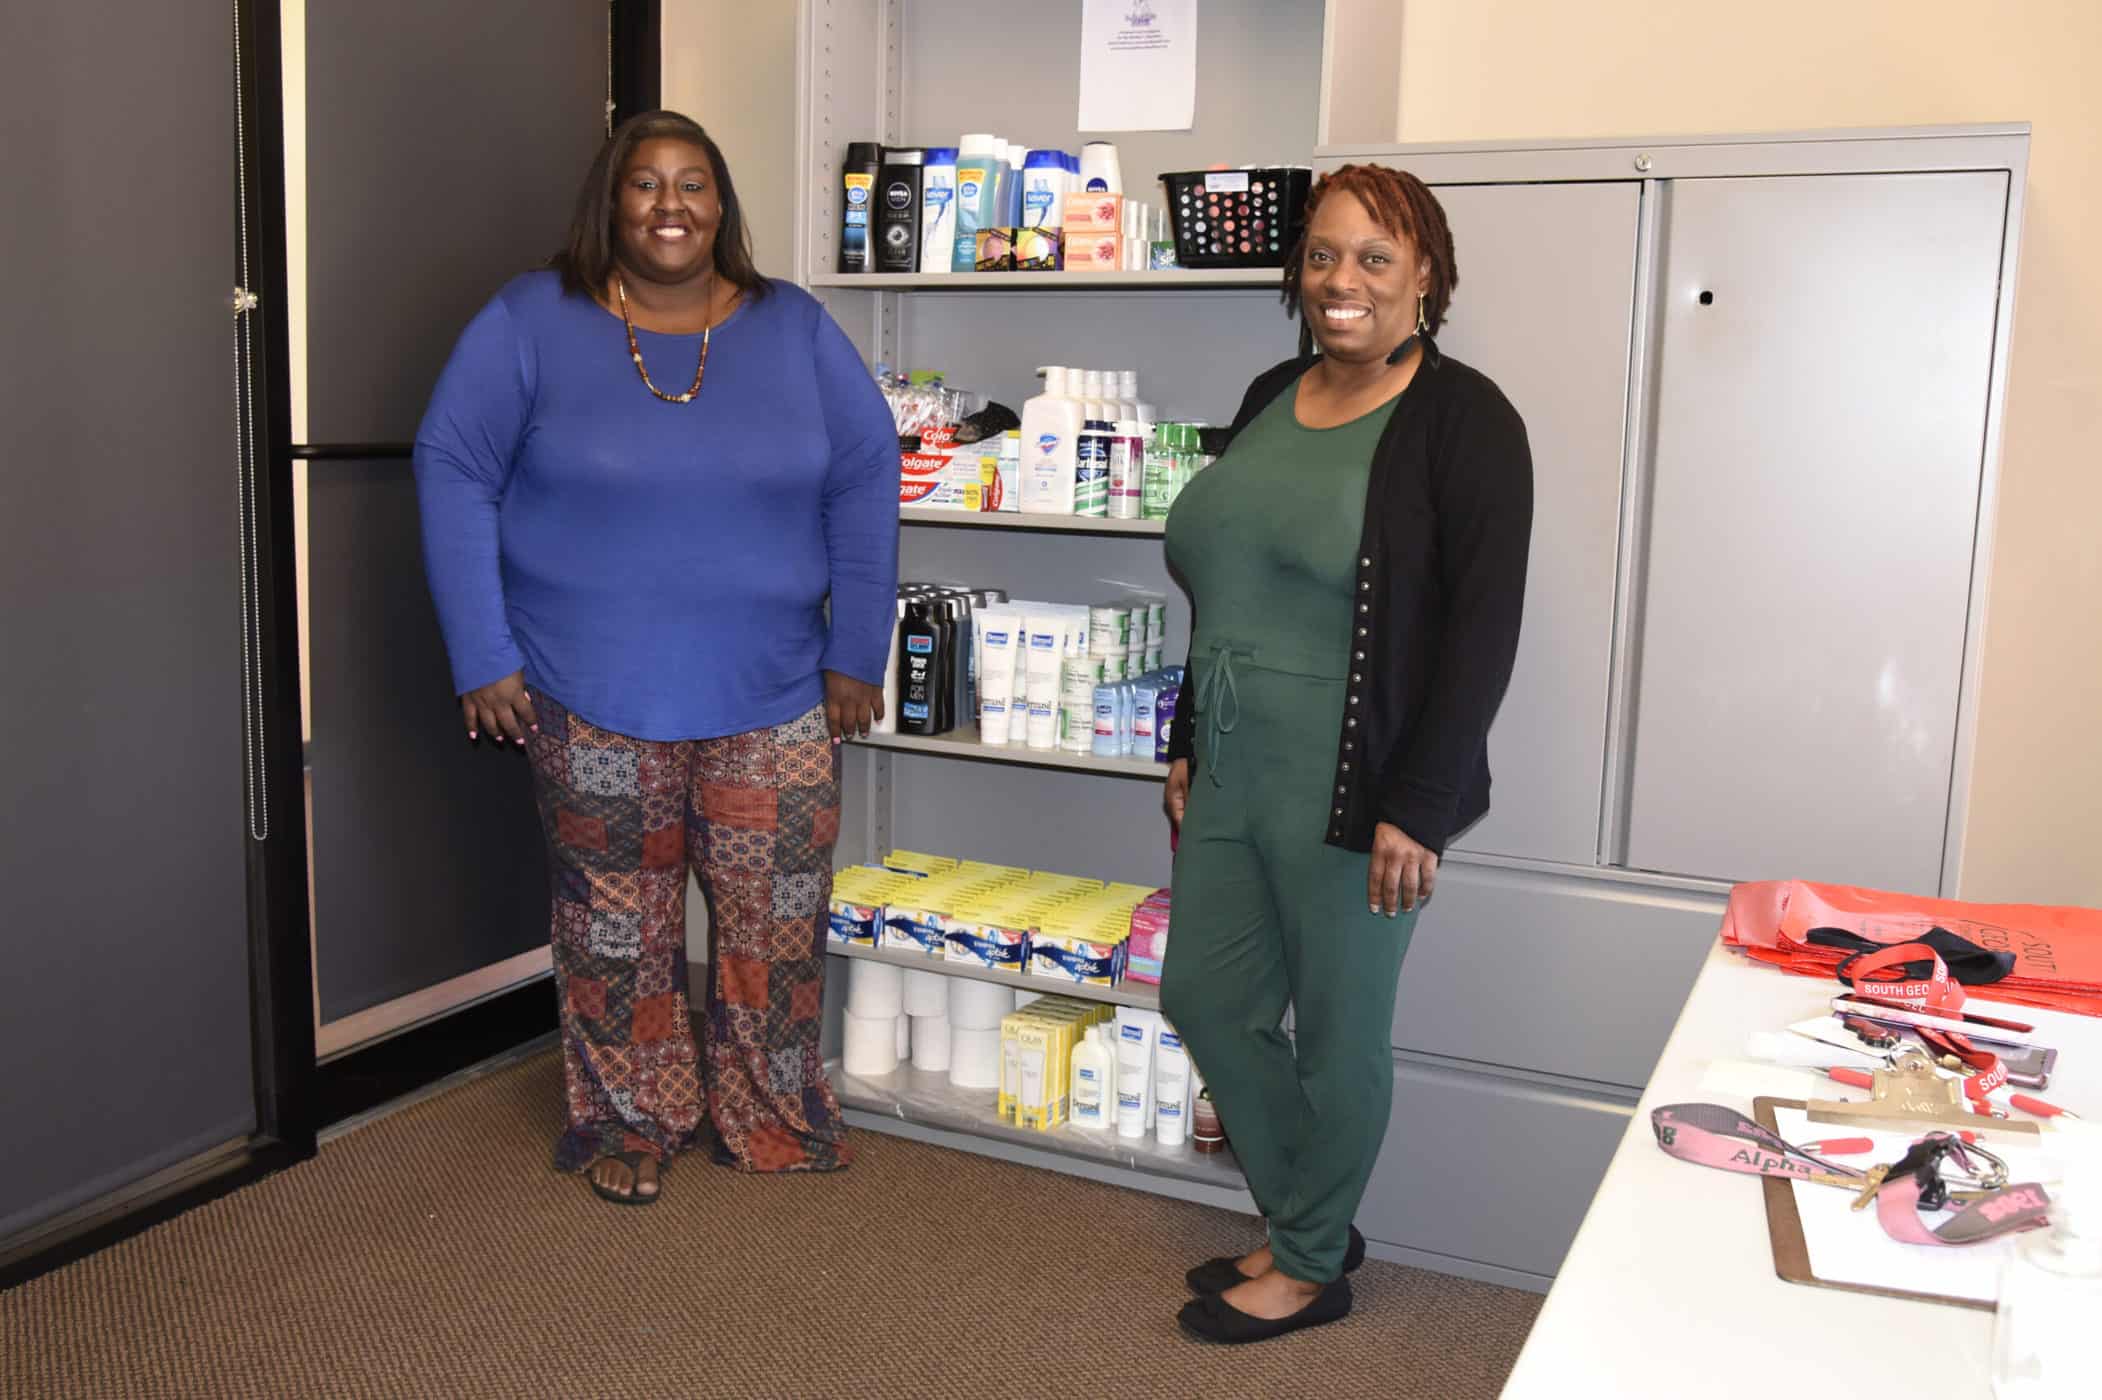 Pictured are SGTC Vice President of Student Affairs Eulish Kinchens (left) and Special Populations Coordinator Jennifer Robinson in the “Jets Pantry”, a service to provide basic hygiene items to SGTC students in need.